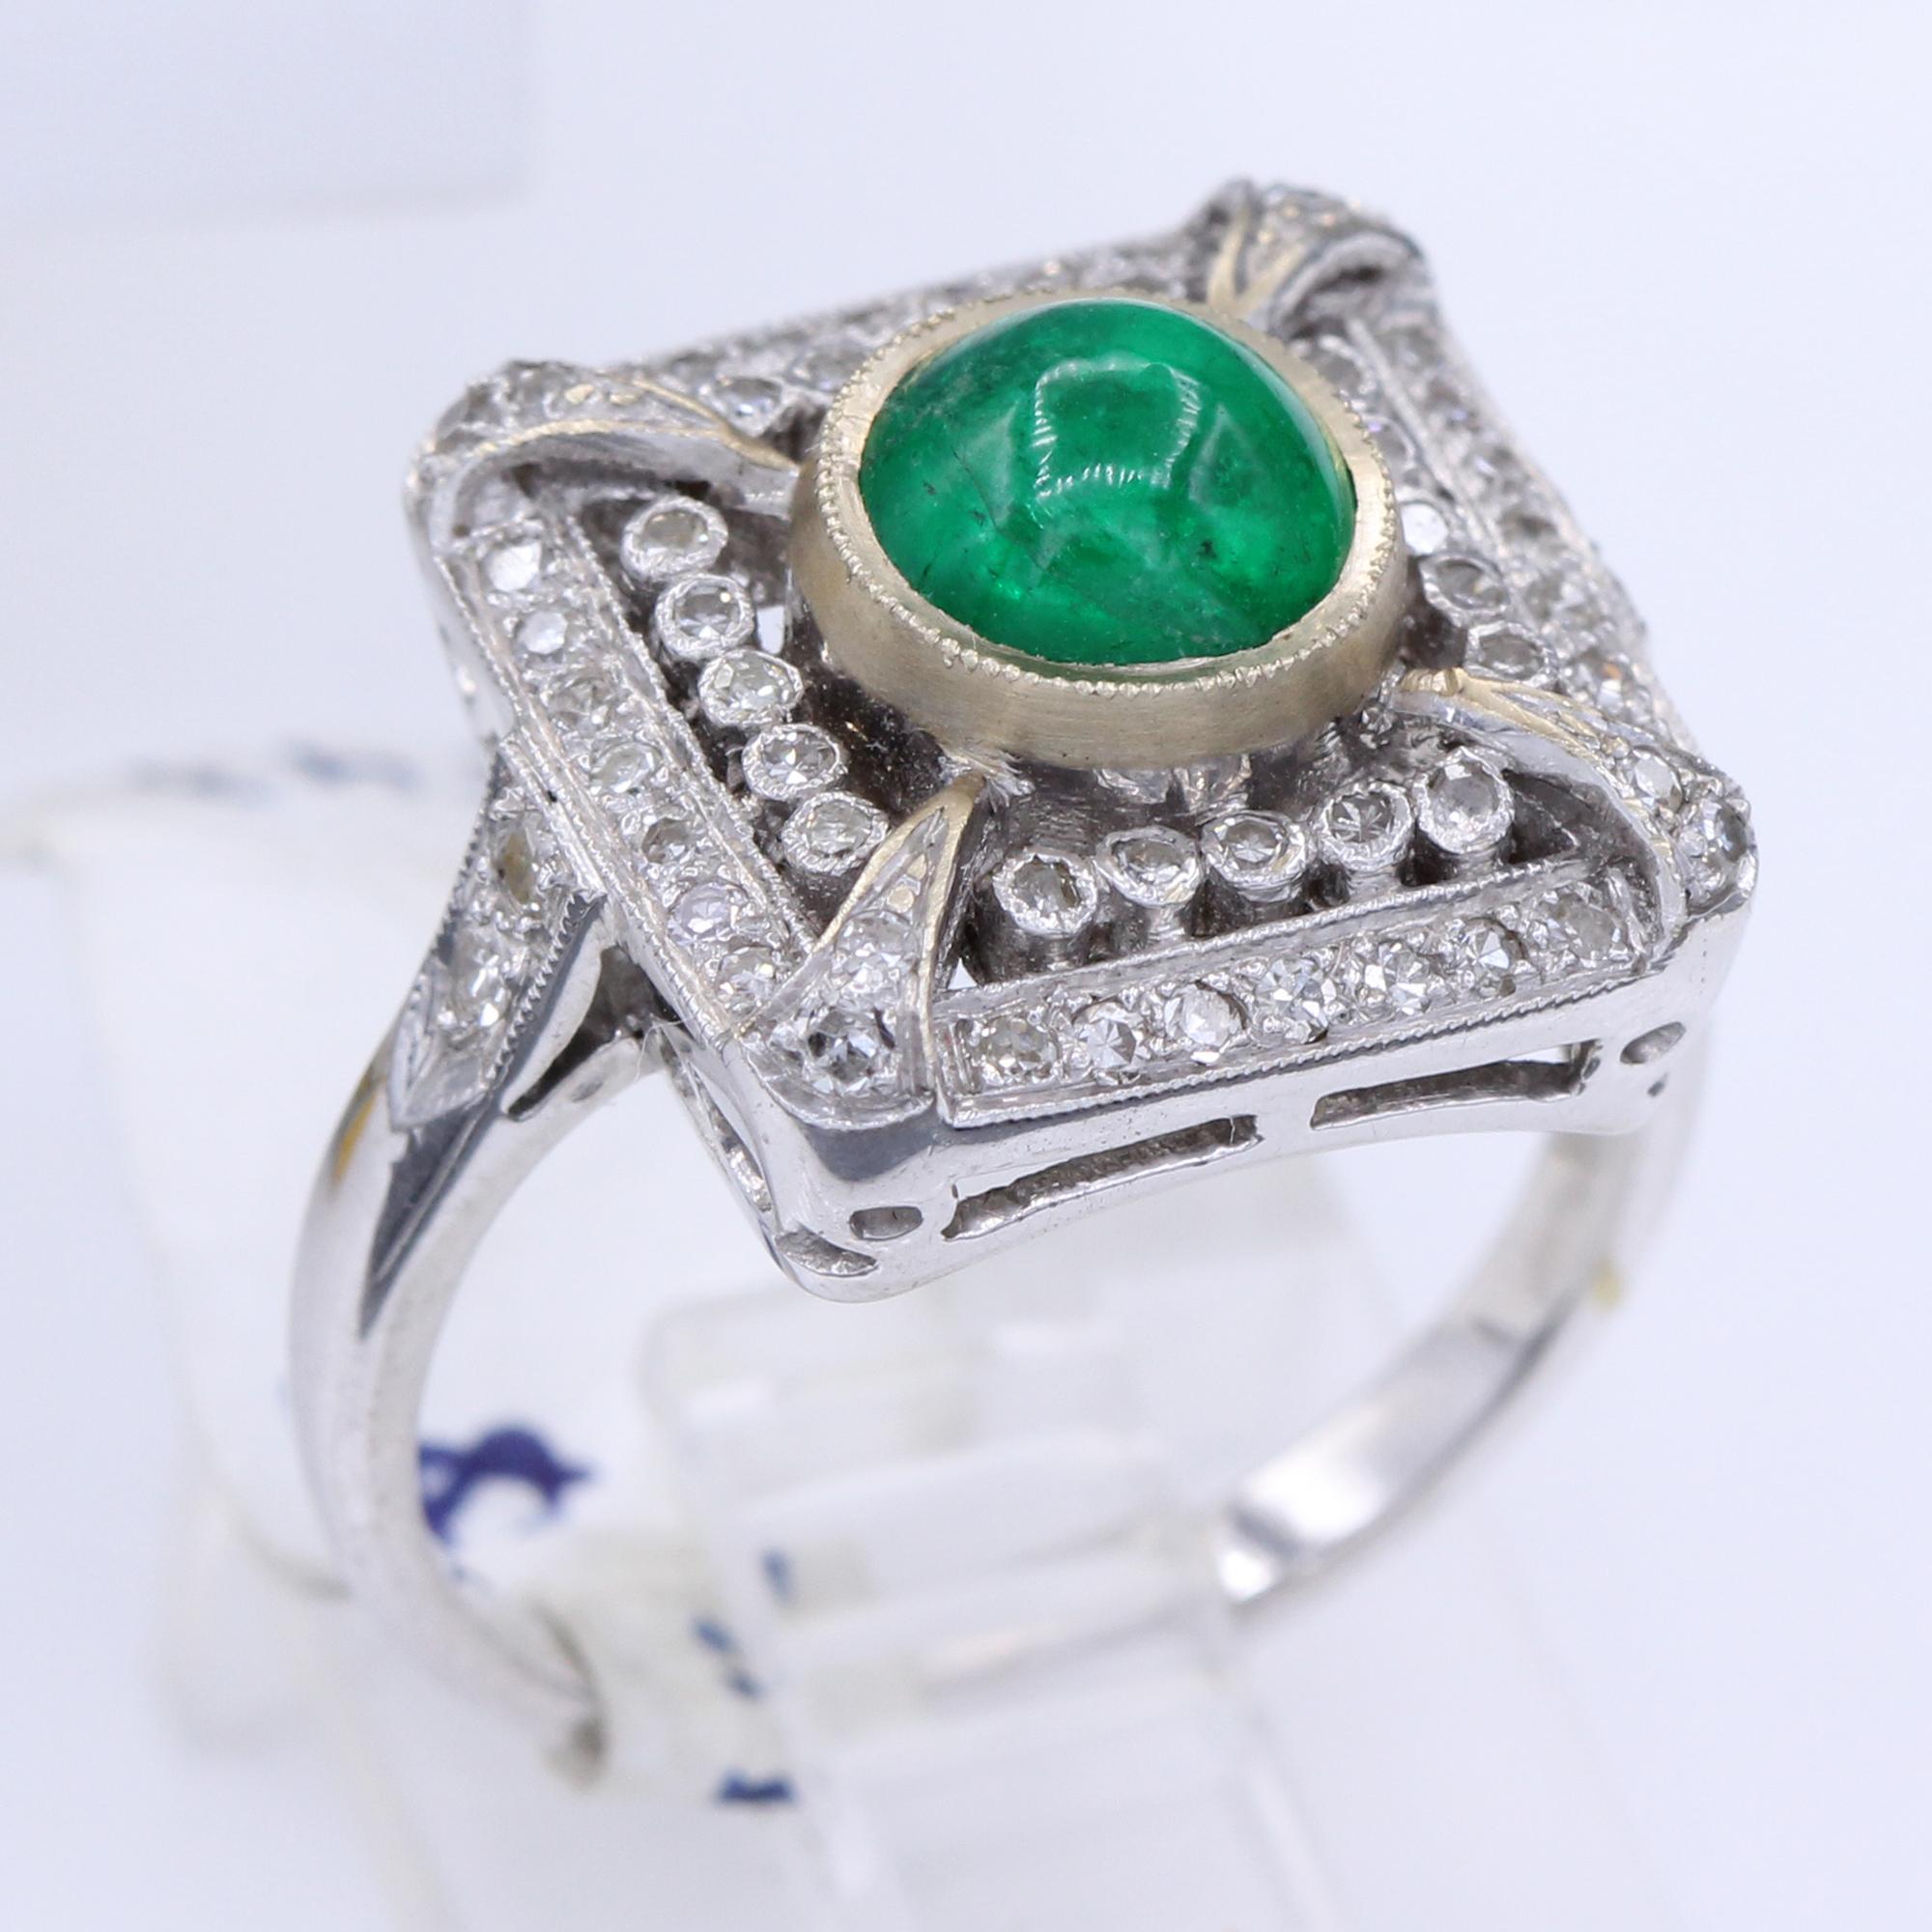 VINTAGE (very good condition)
EMERALD & DIAMOND RING 
18K WHITE GOLD 5.5 GRAMS 
SQUARE DESIGN APPROX  15 X 15 MM 
ALL STONES ARE NATURAL 
DIAMONDS TOTAL APPROX   0.60 CARAT 
EMERALD APPROX APPROX 1.0 CARAT
FINGER SIZE 6.5

